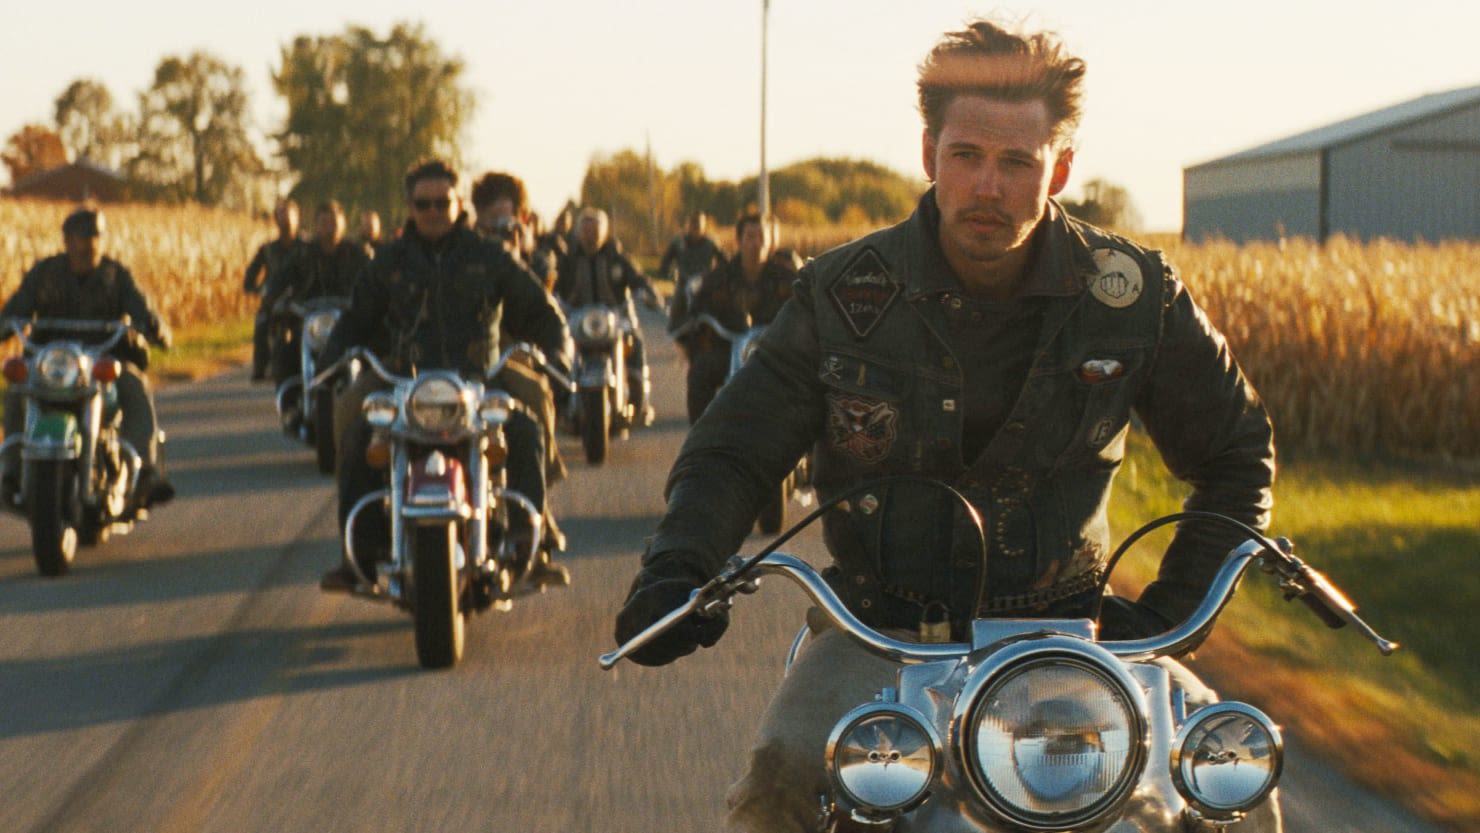 ‘The Bikeriders’ Is So Sexy It’ll Leave You Sweating